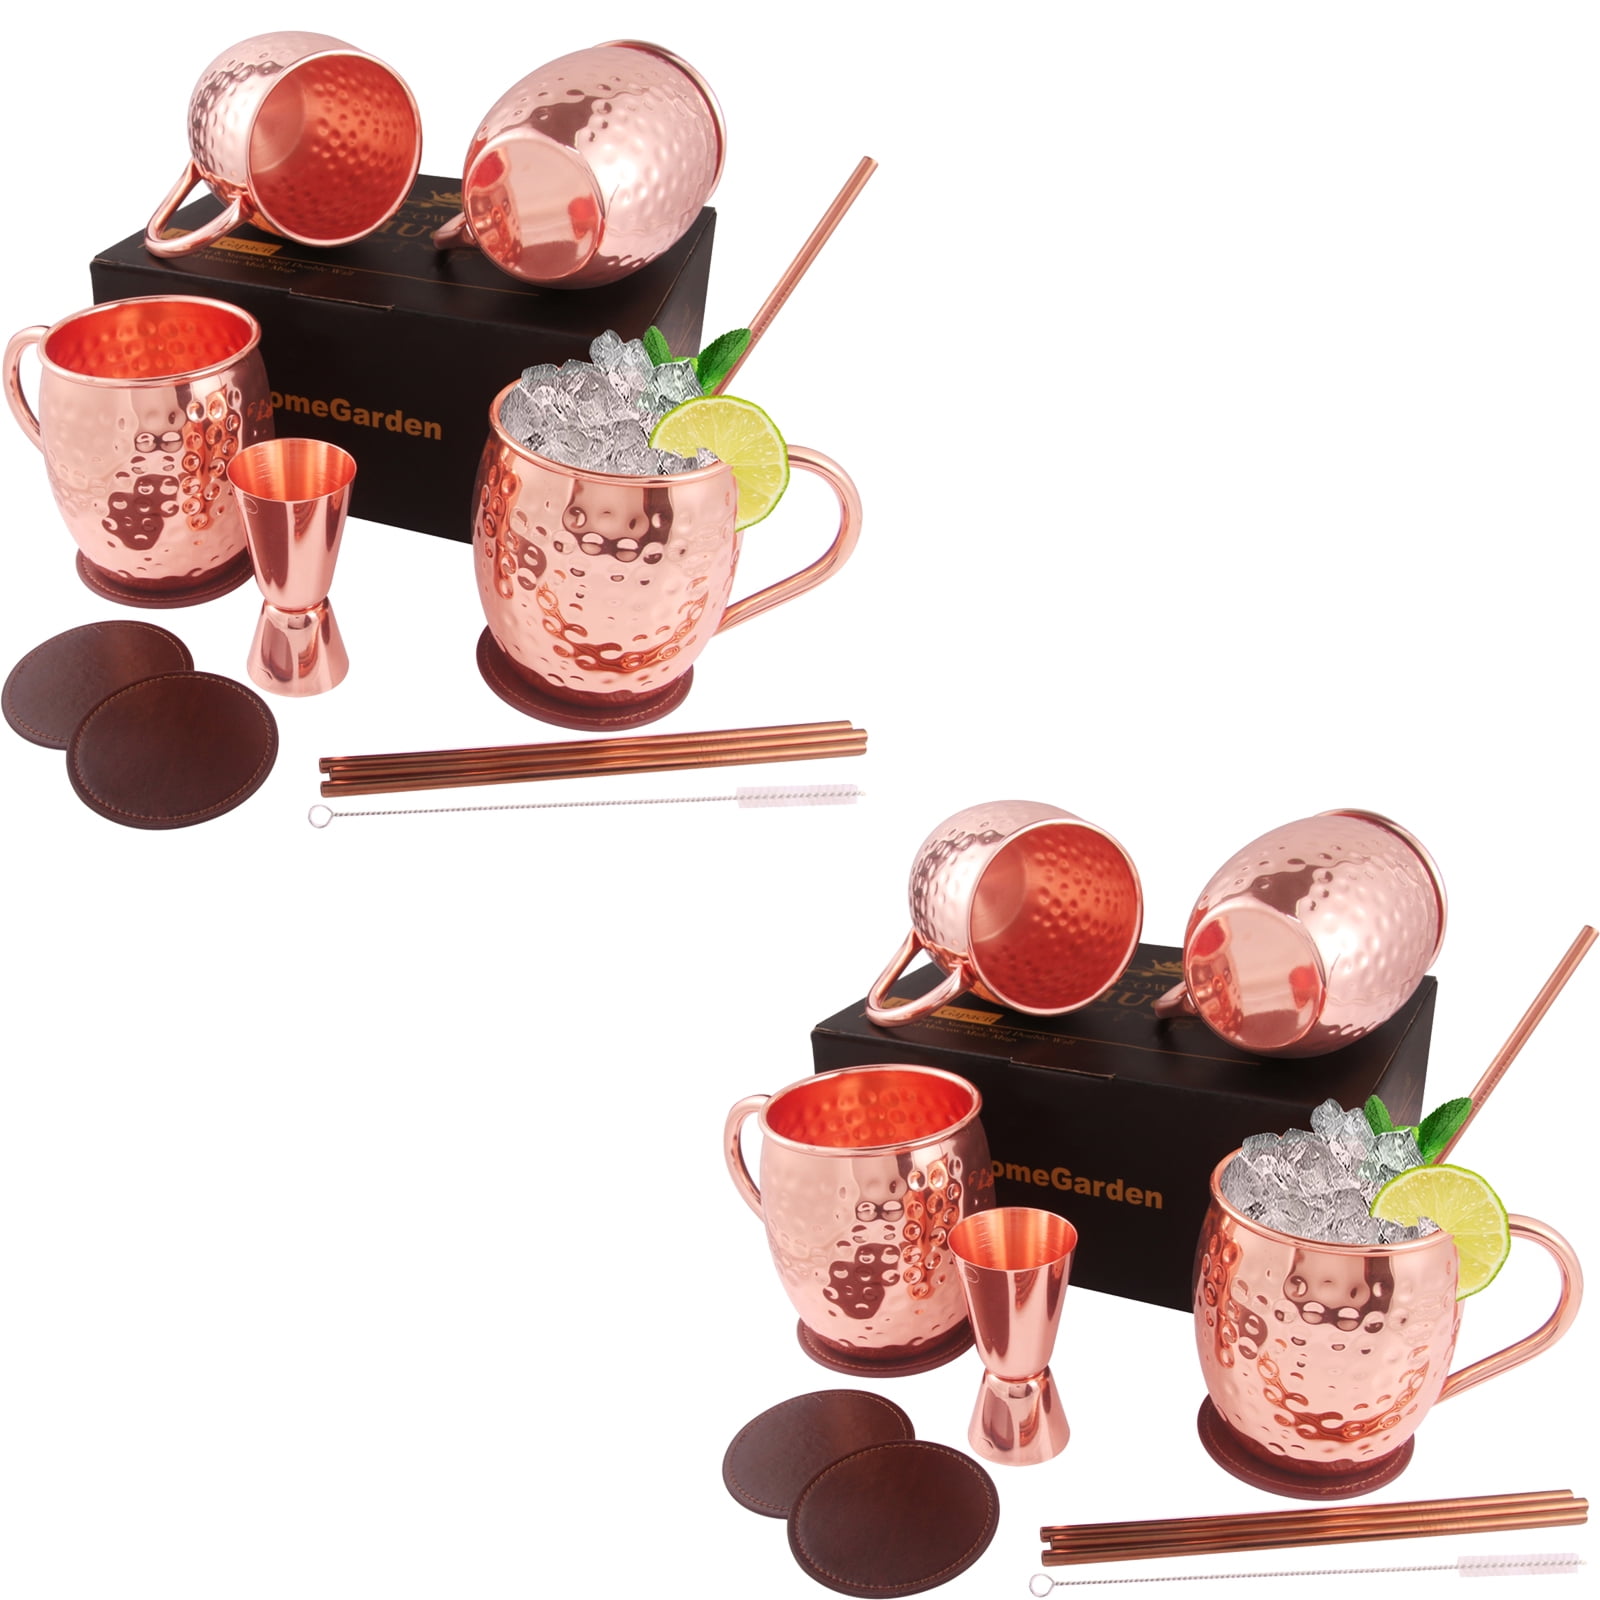 Yooreka Gift Set Moscow Mule Mugs Set Of 4 16 oz Solid Cooper, 100% Pure  Copper Cups HANDCRAFTED,BONUS 4 Straws, 4 Wood Coasters, Stirring Spoon,  Shot